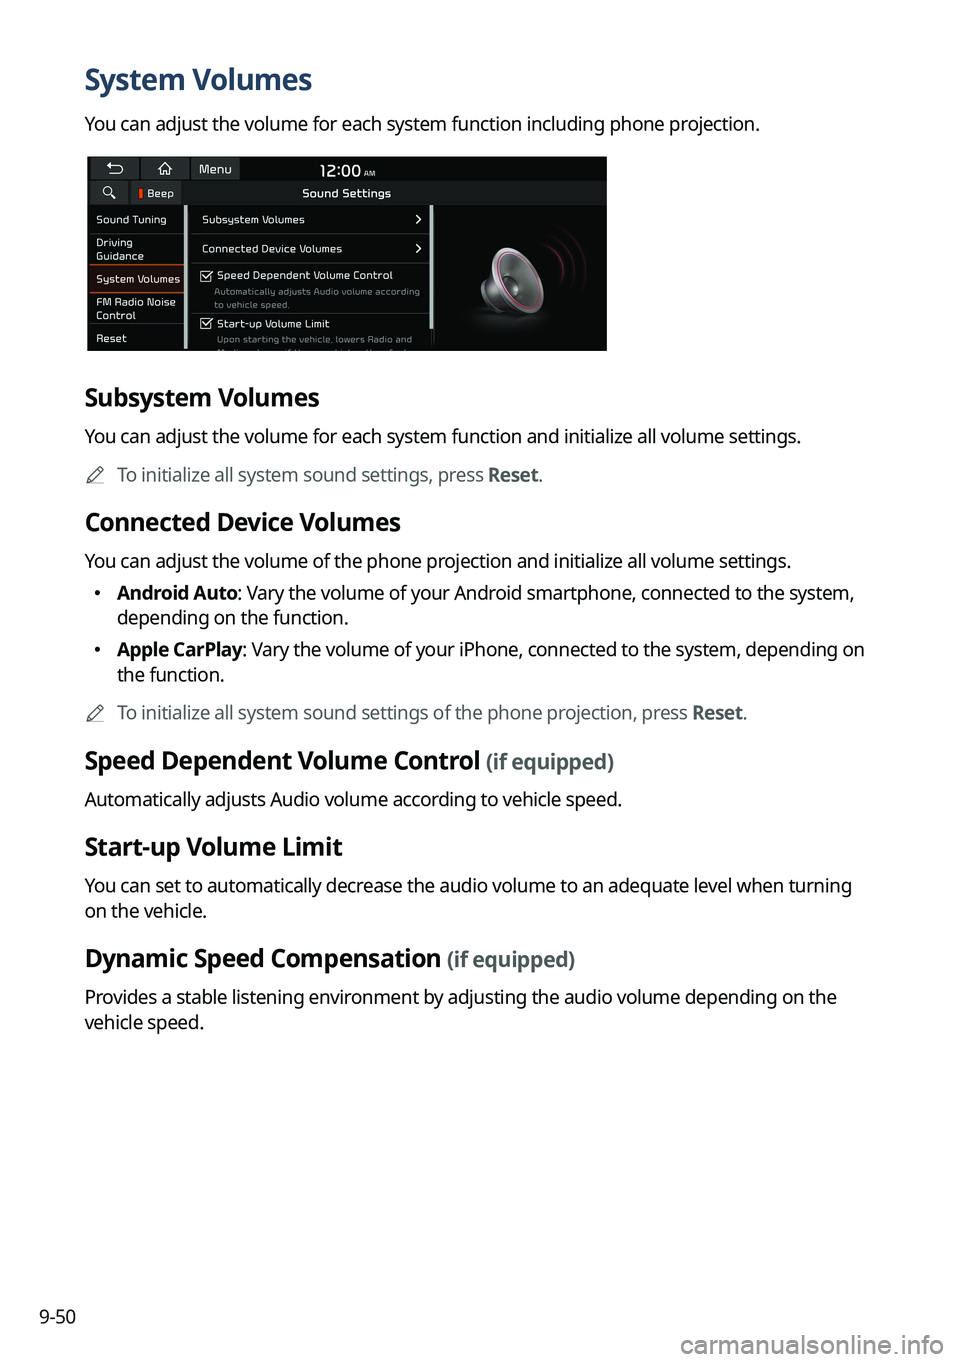 KIA CARNIVAL 2023  Navigation System Quick Reference Guide 9-50
System Volumes
You can adjust the volume for each system function including phone projection.
Subsystem Volumes
You can adjust the volume for each system function and initialize all volume settin